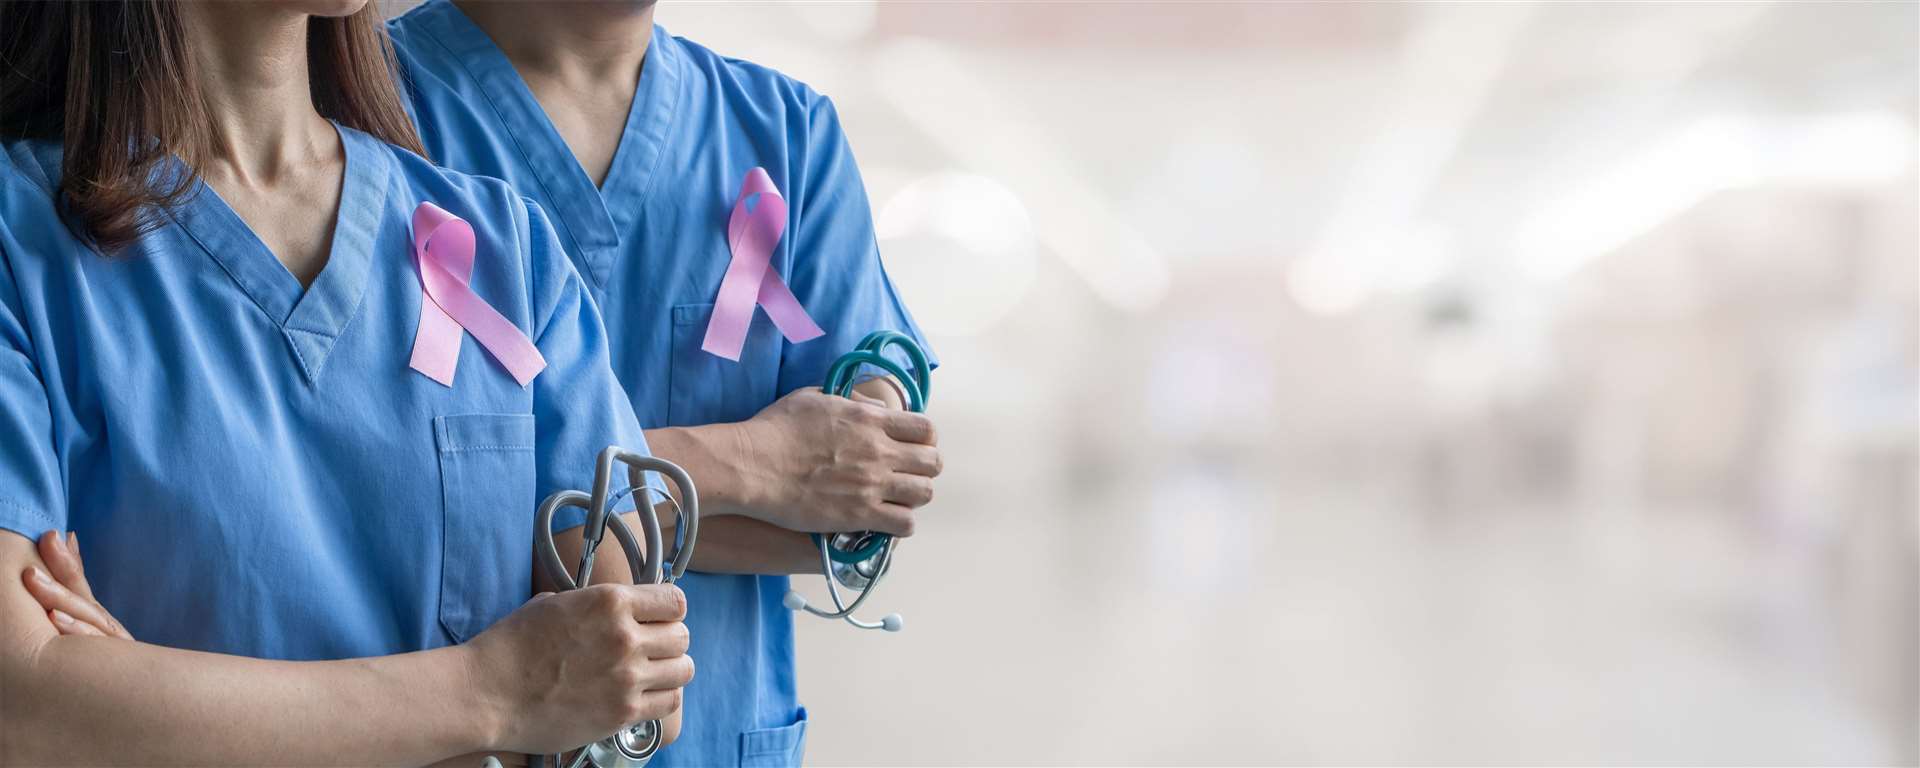 The new breast cancer detection method has been used for the first time in Scotland at Raigmore Hospital. Photo: Adobe Stock